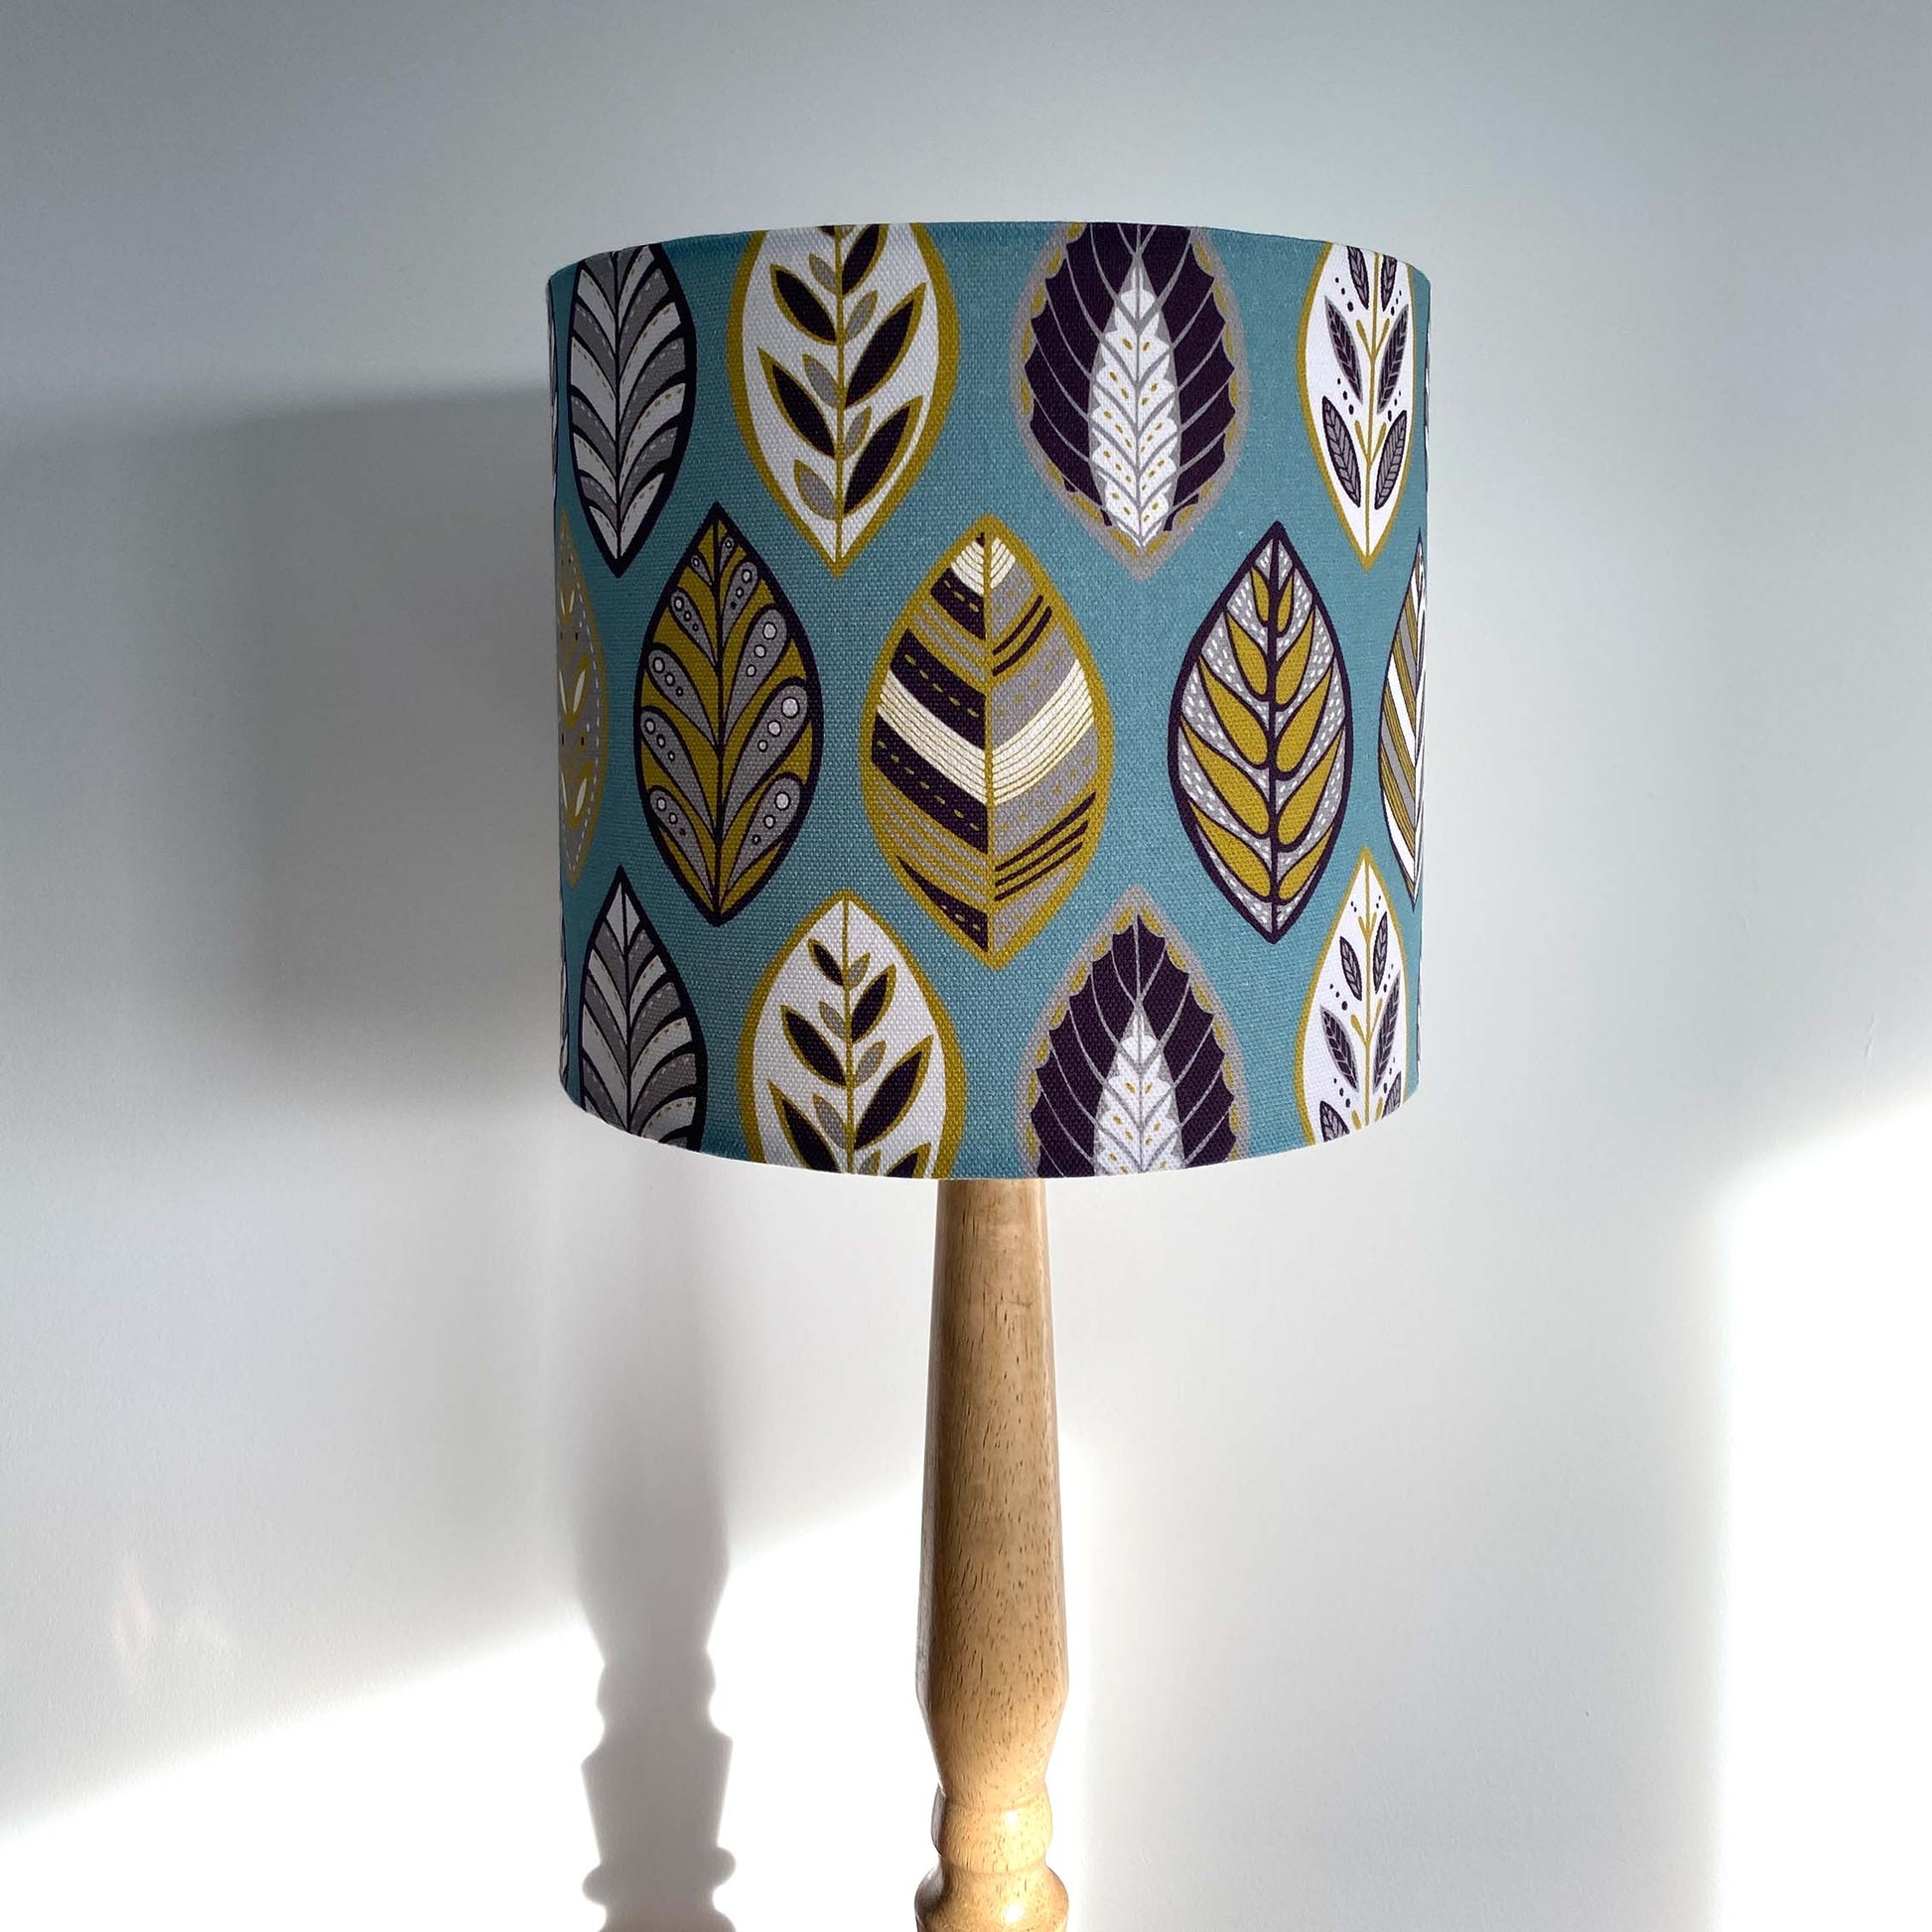 Small Blue Beech leaf Lampshade, shown here on a wooden table lamp. The pattern features a Skandi style Blue, yellow, grey and white Leaf pattern on a Blue Background.